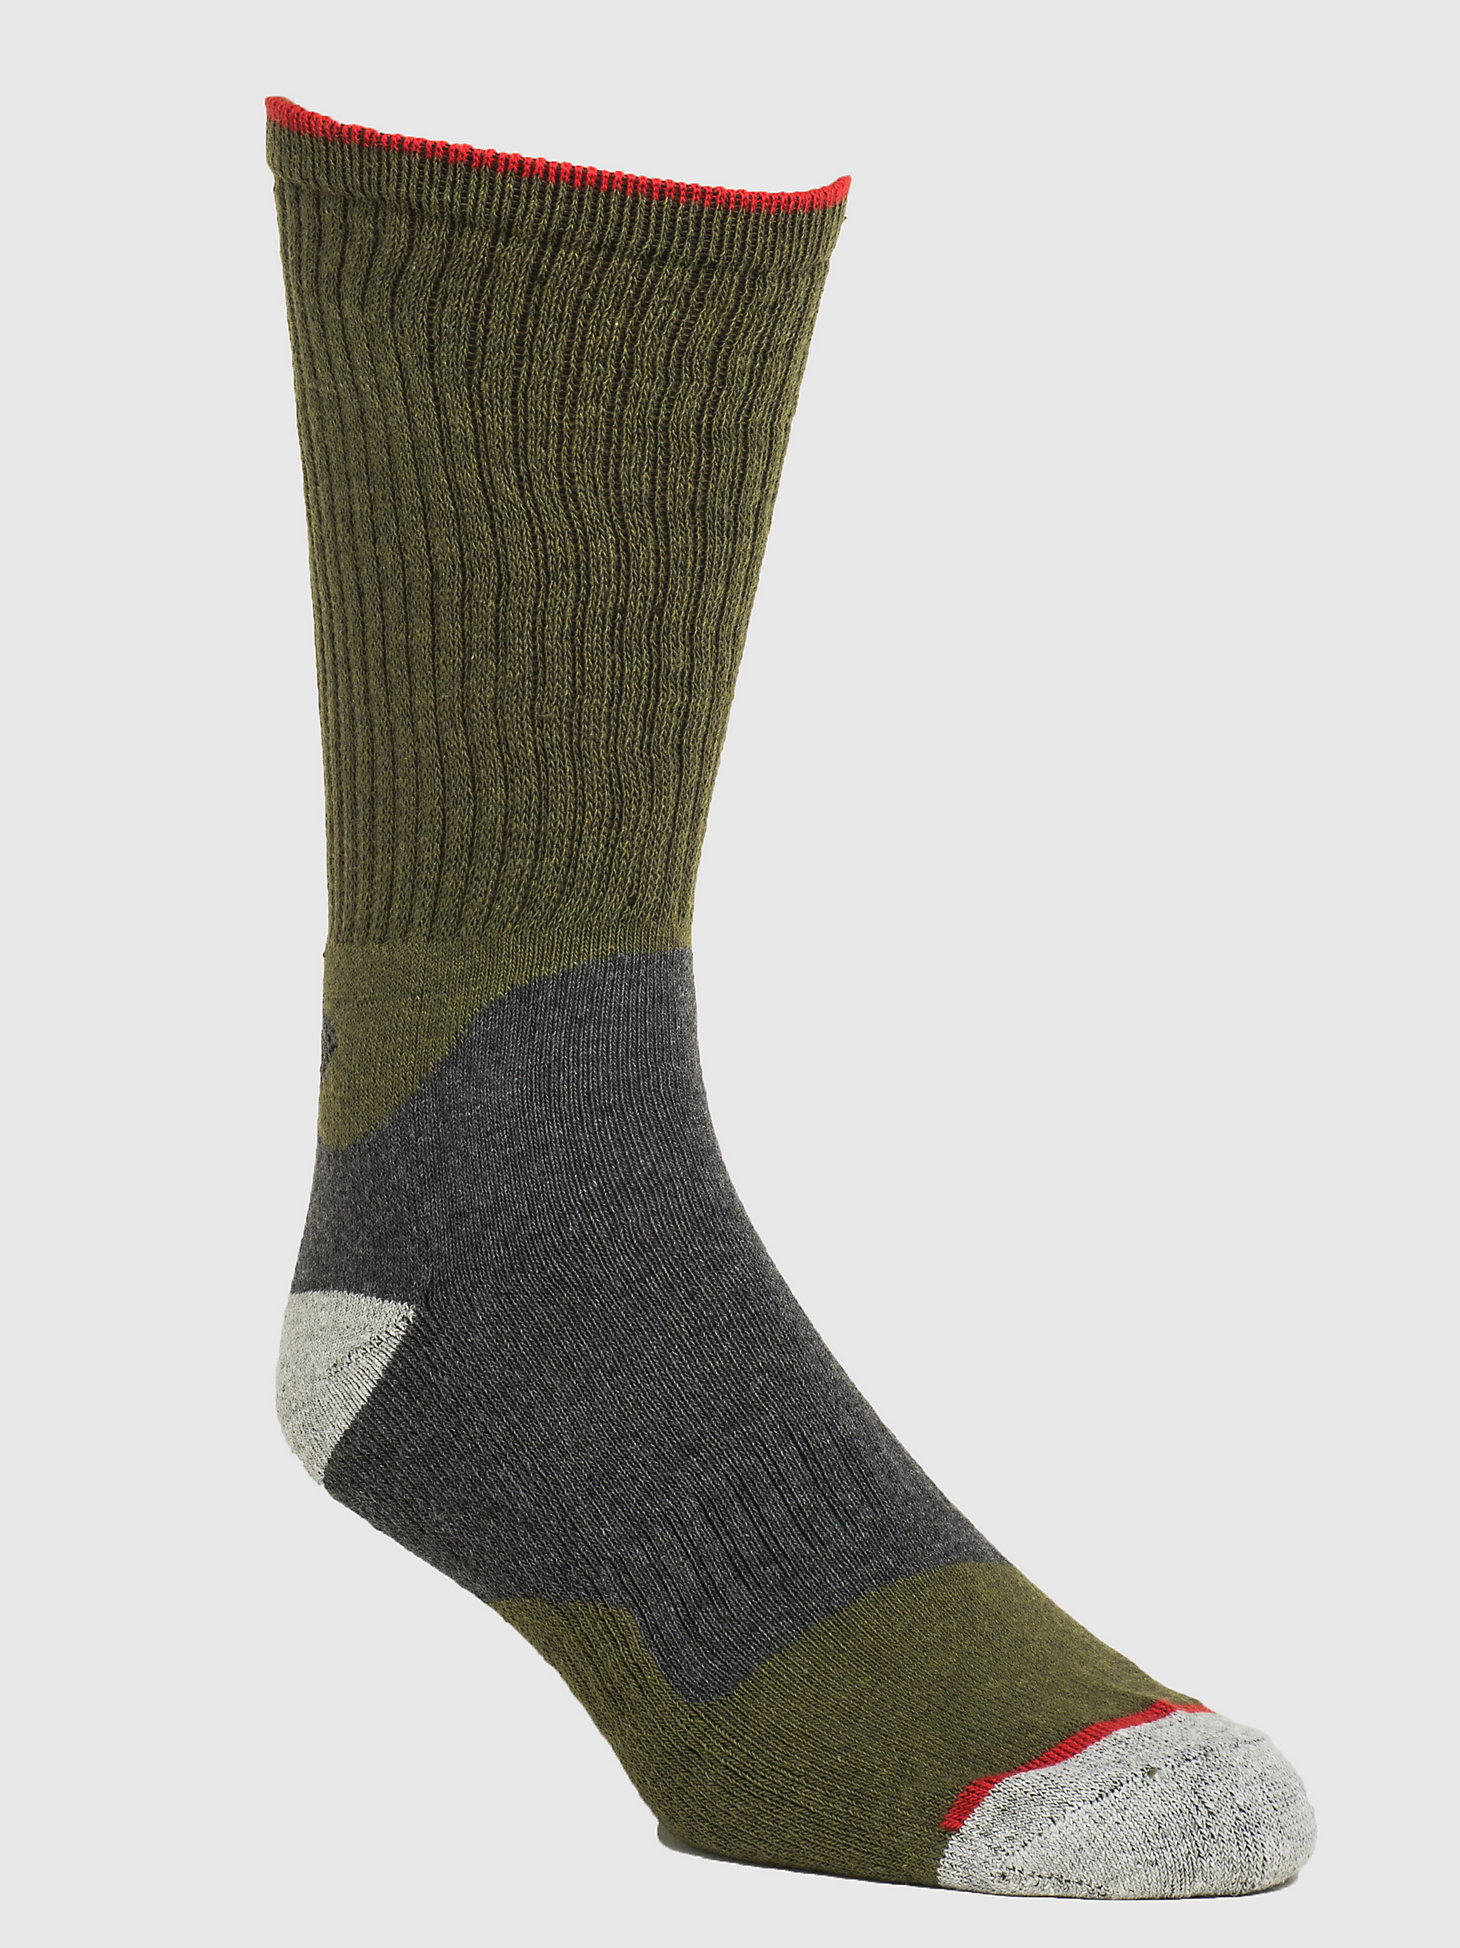 Men's Wrangler Mid-Weight Crew Work Socks (3-Pack) in Army Green alternative view 6